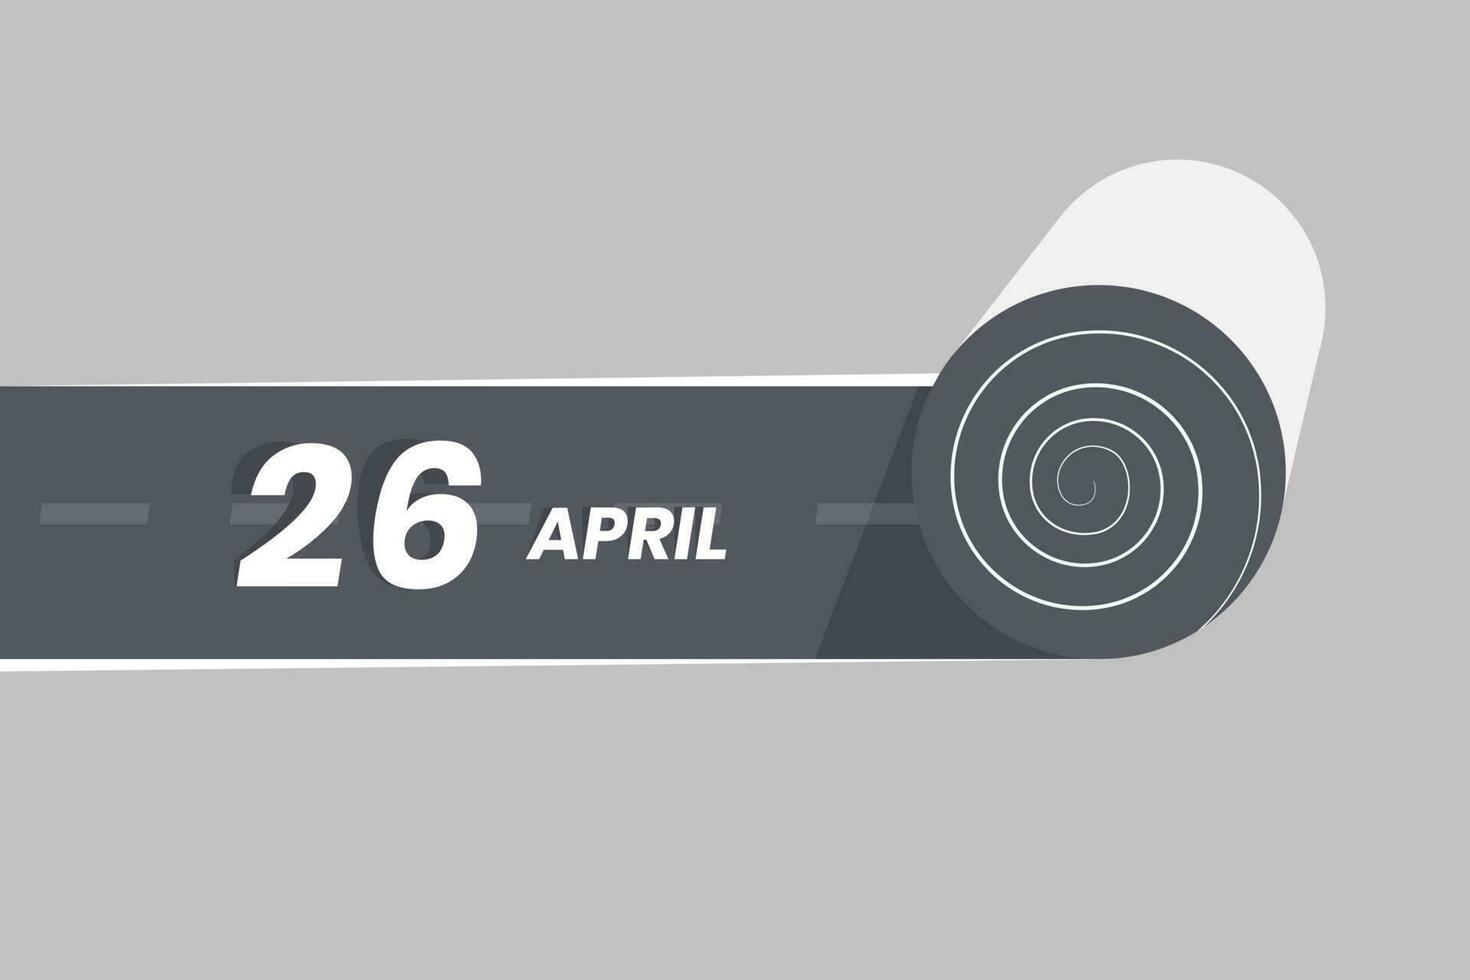 April 26 calendar icon rolling inside the road. 26 April Date Month icon vector illustrator.